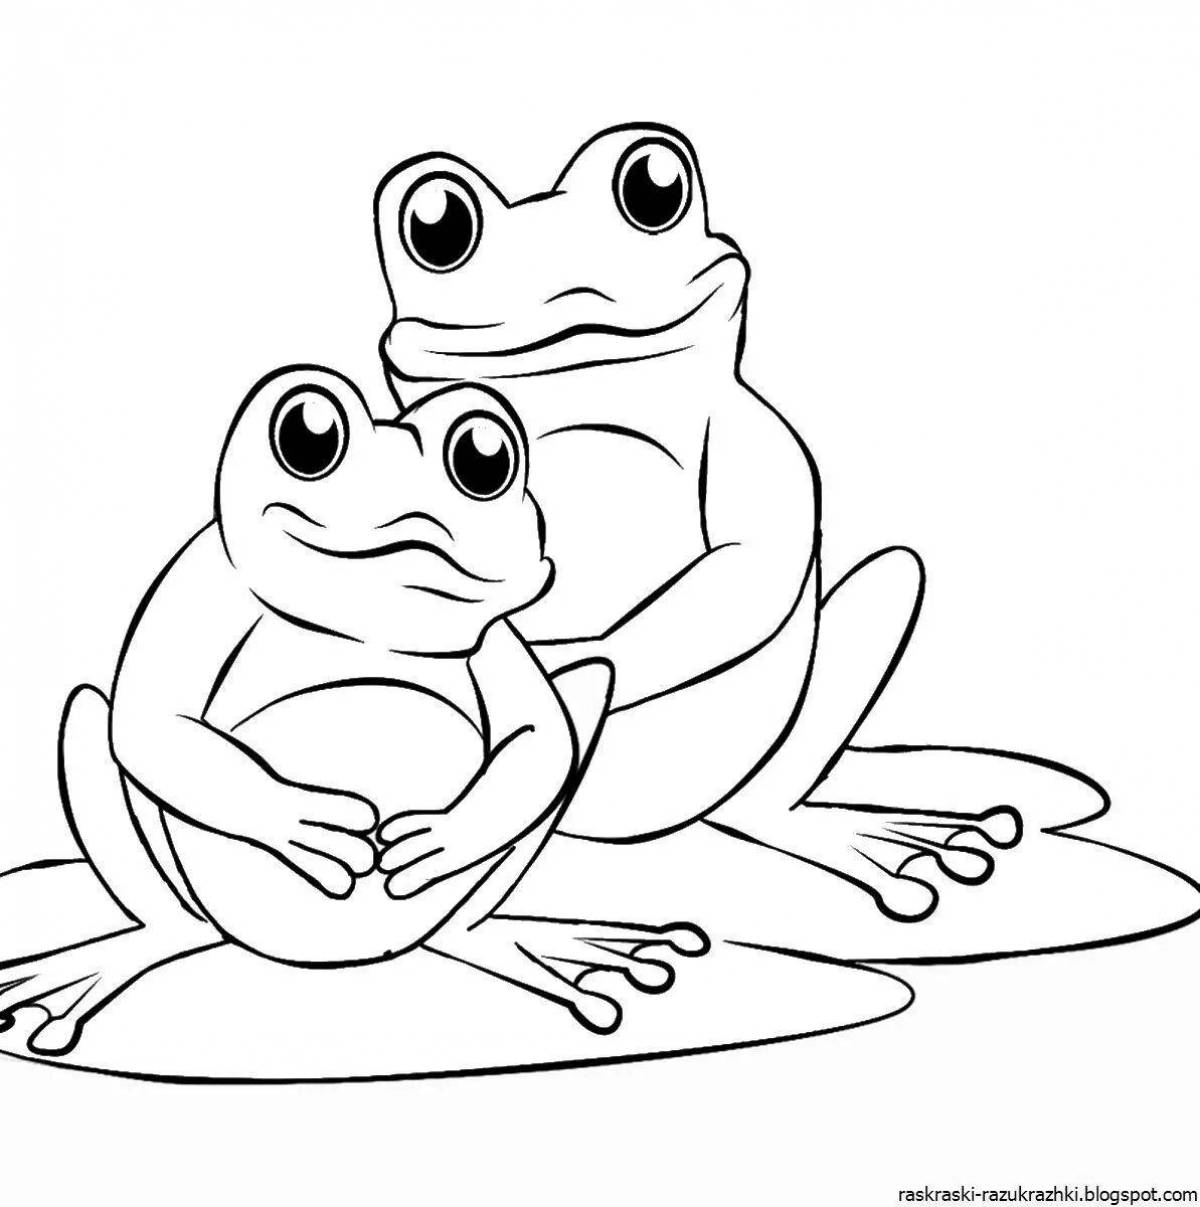 Colorful toad coloring page for kids